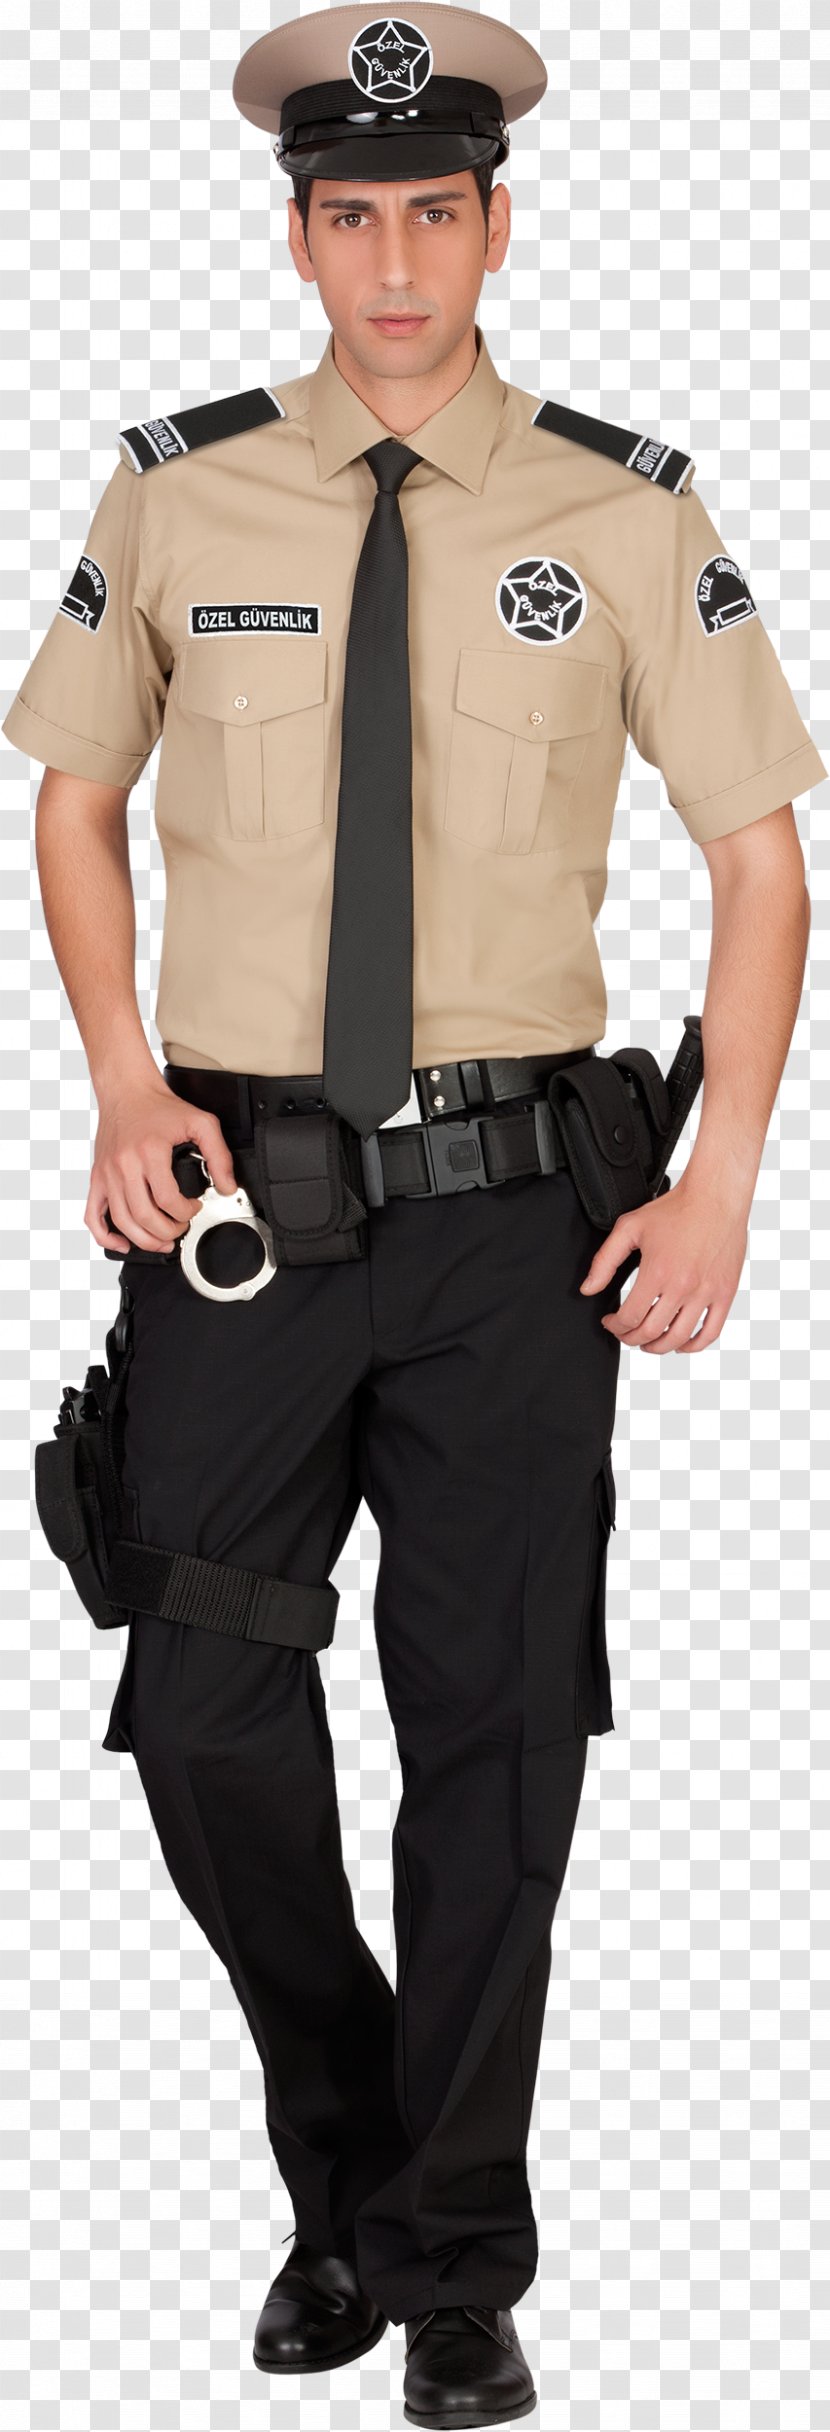 Police Officer Security Guard Military Uniform - Dress Transparent PNG